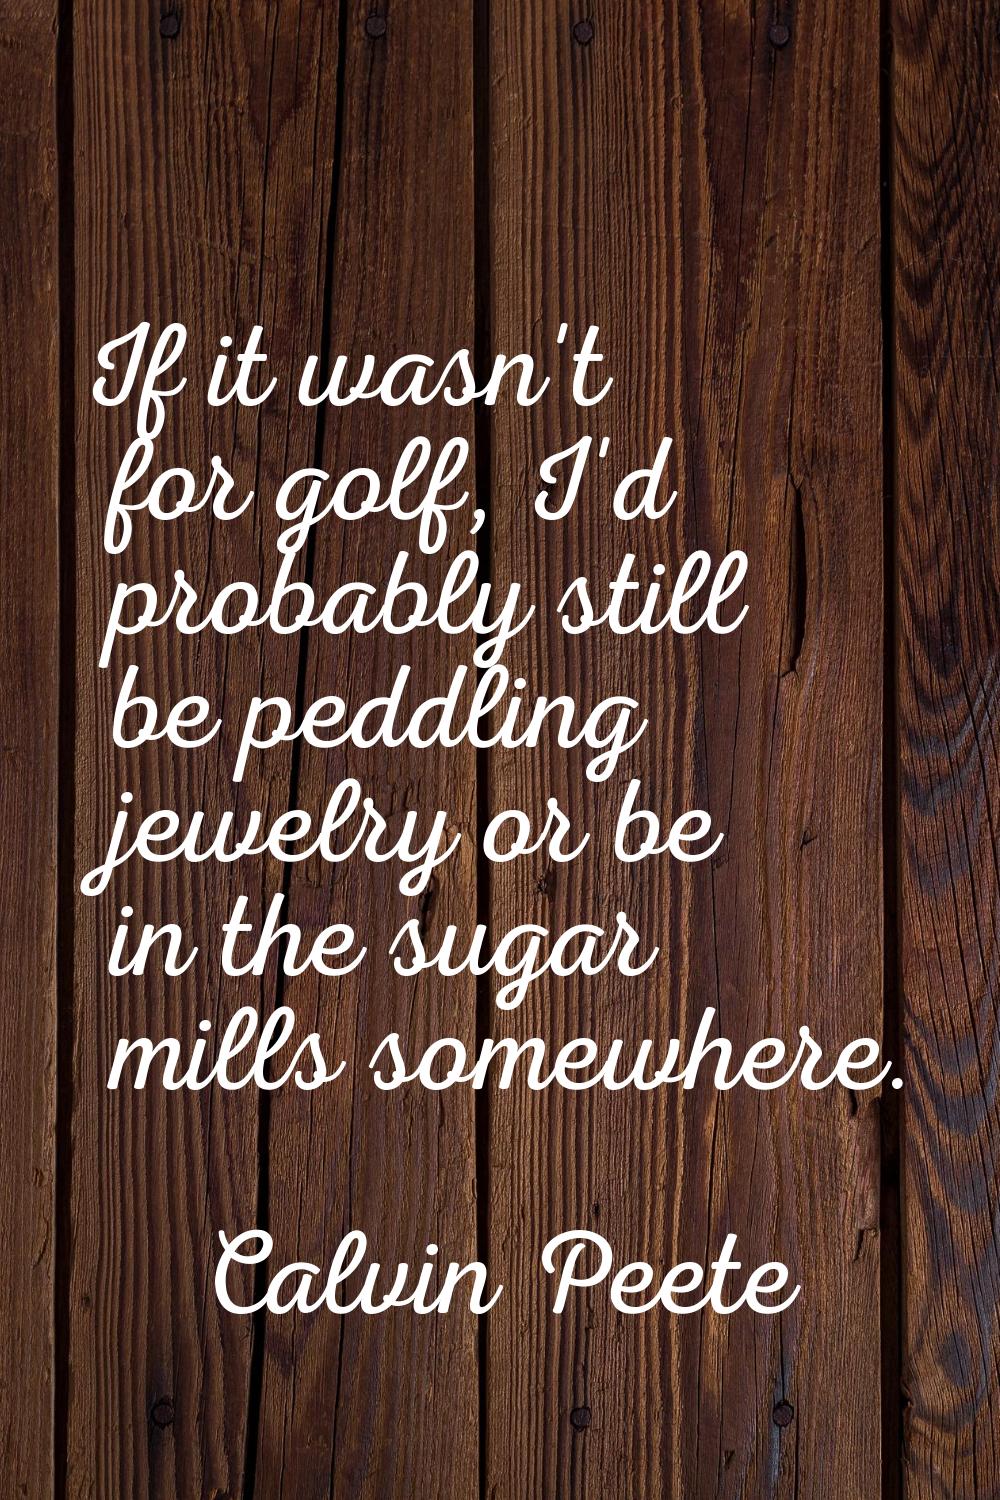 If it wasn't for golf, I'd probably still be peddling jewelry or be in the sugar mills somewhere.